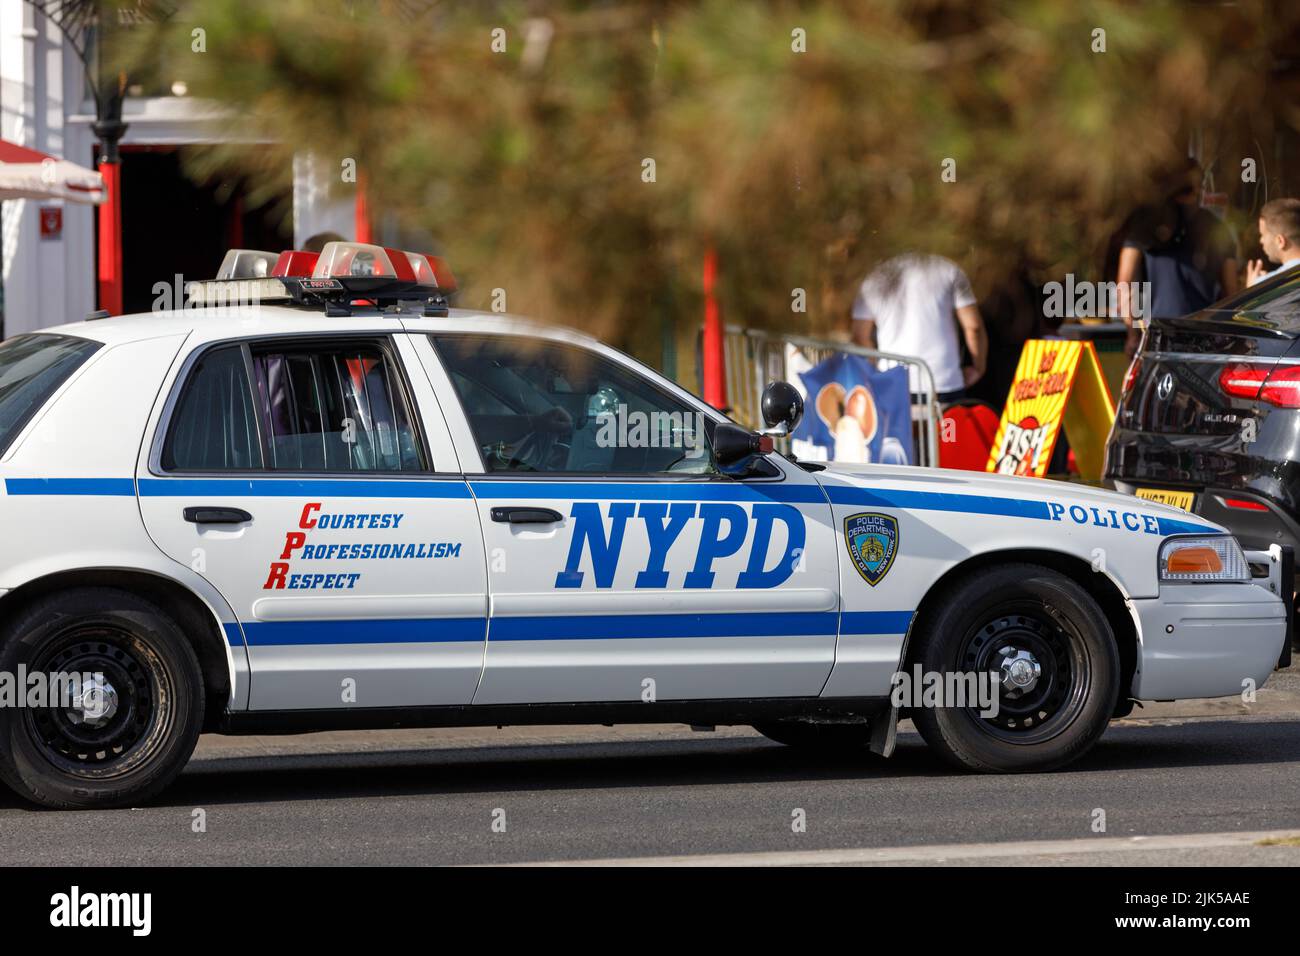 A vintage NYPD Ford Crown Victoria sedan car driving on an English street. New York Police Department vehicle in the UK Stock Photo